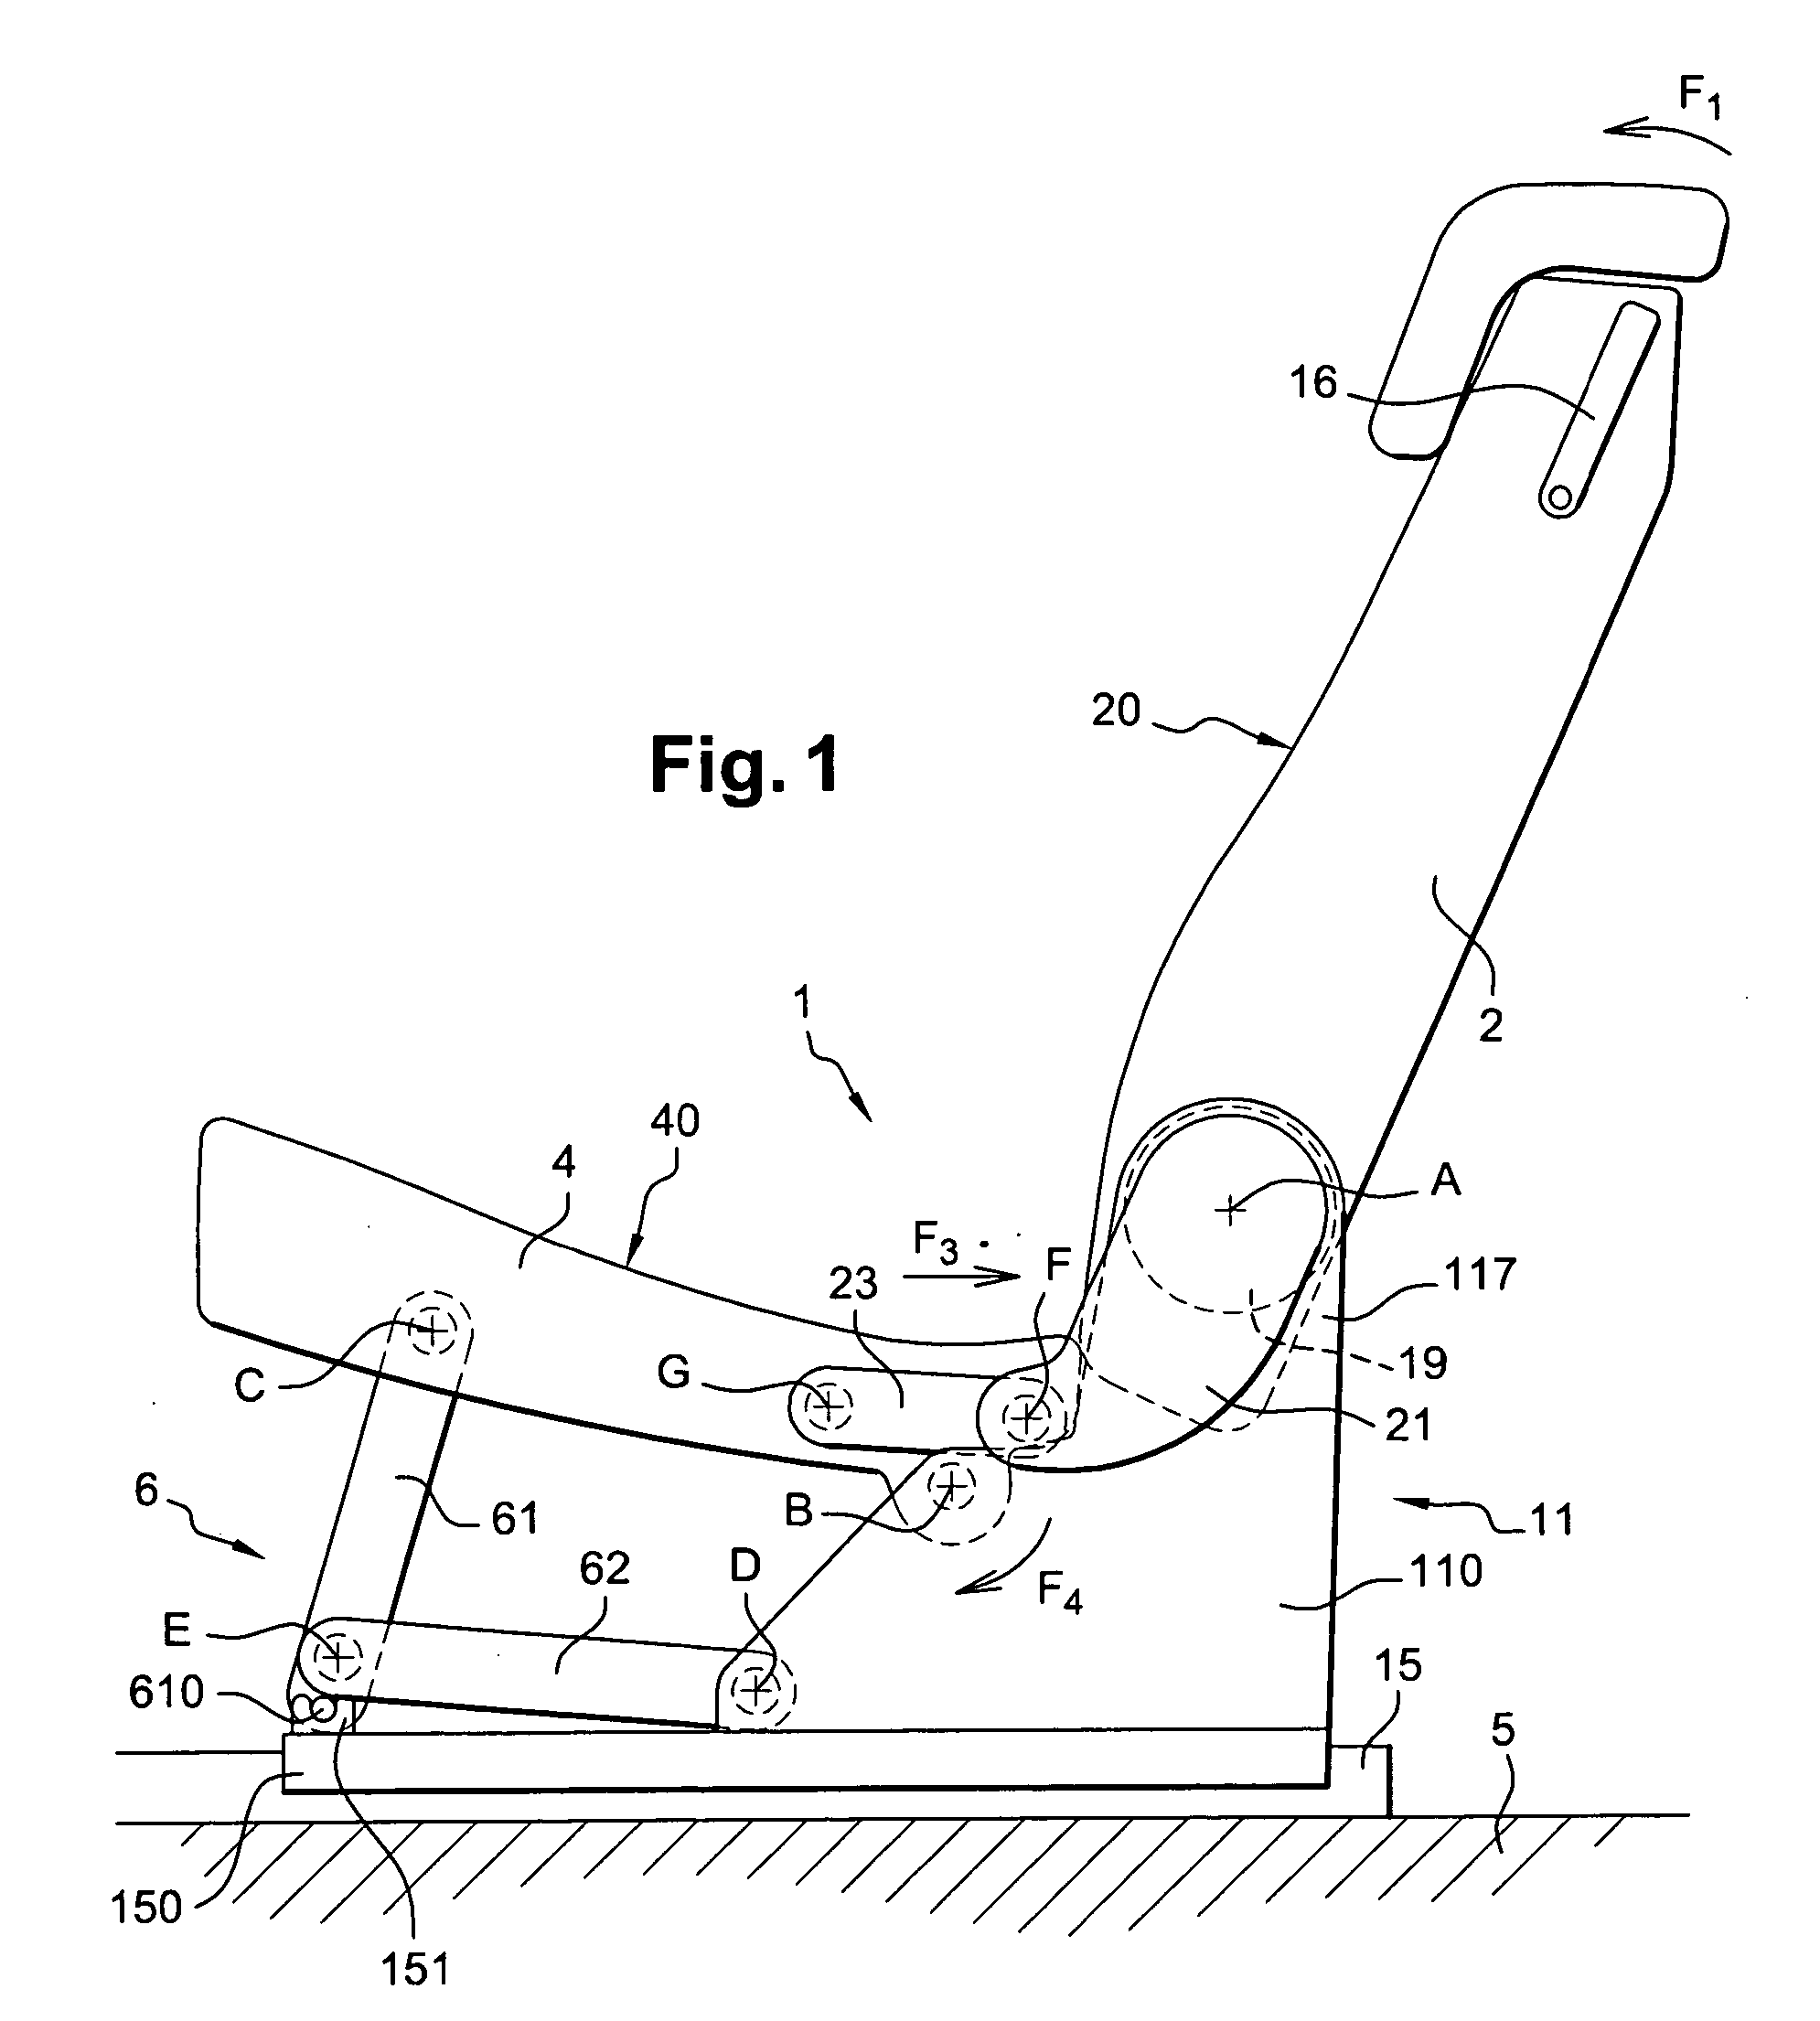 Arrangement for a seat for an automobile vehicle to limit its overall lengthwise size